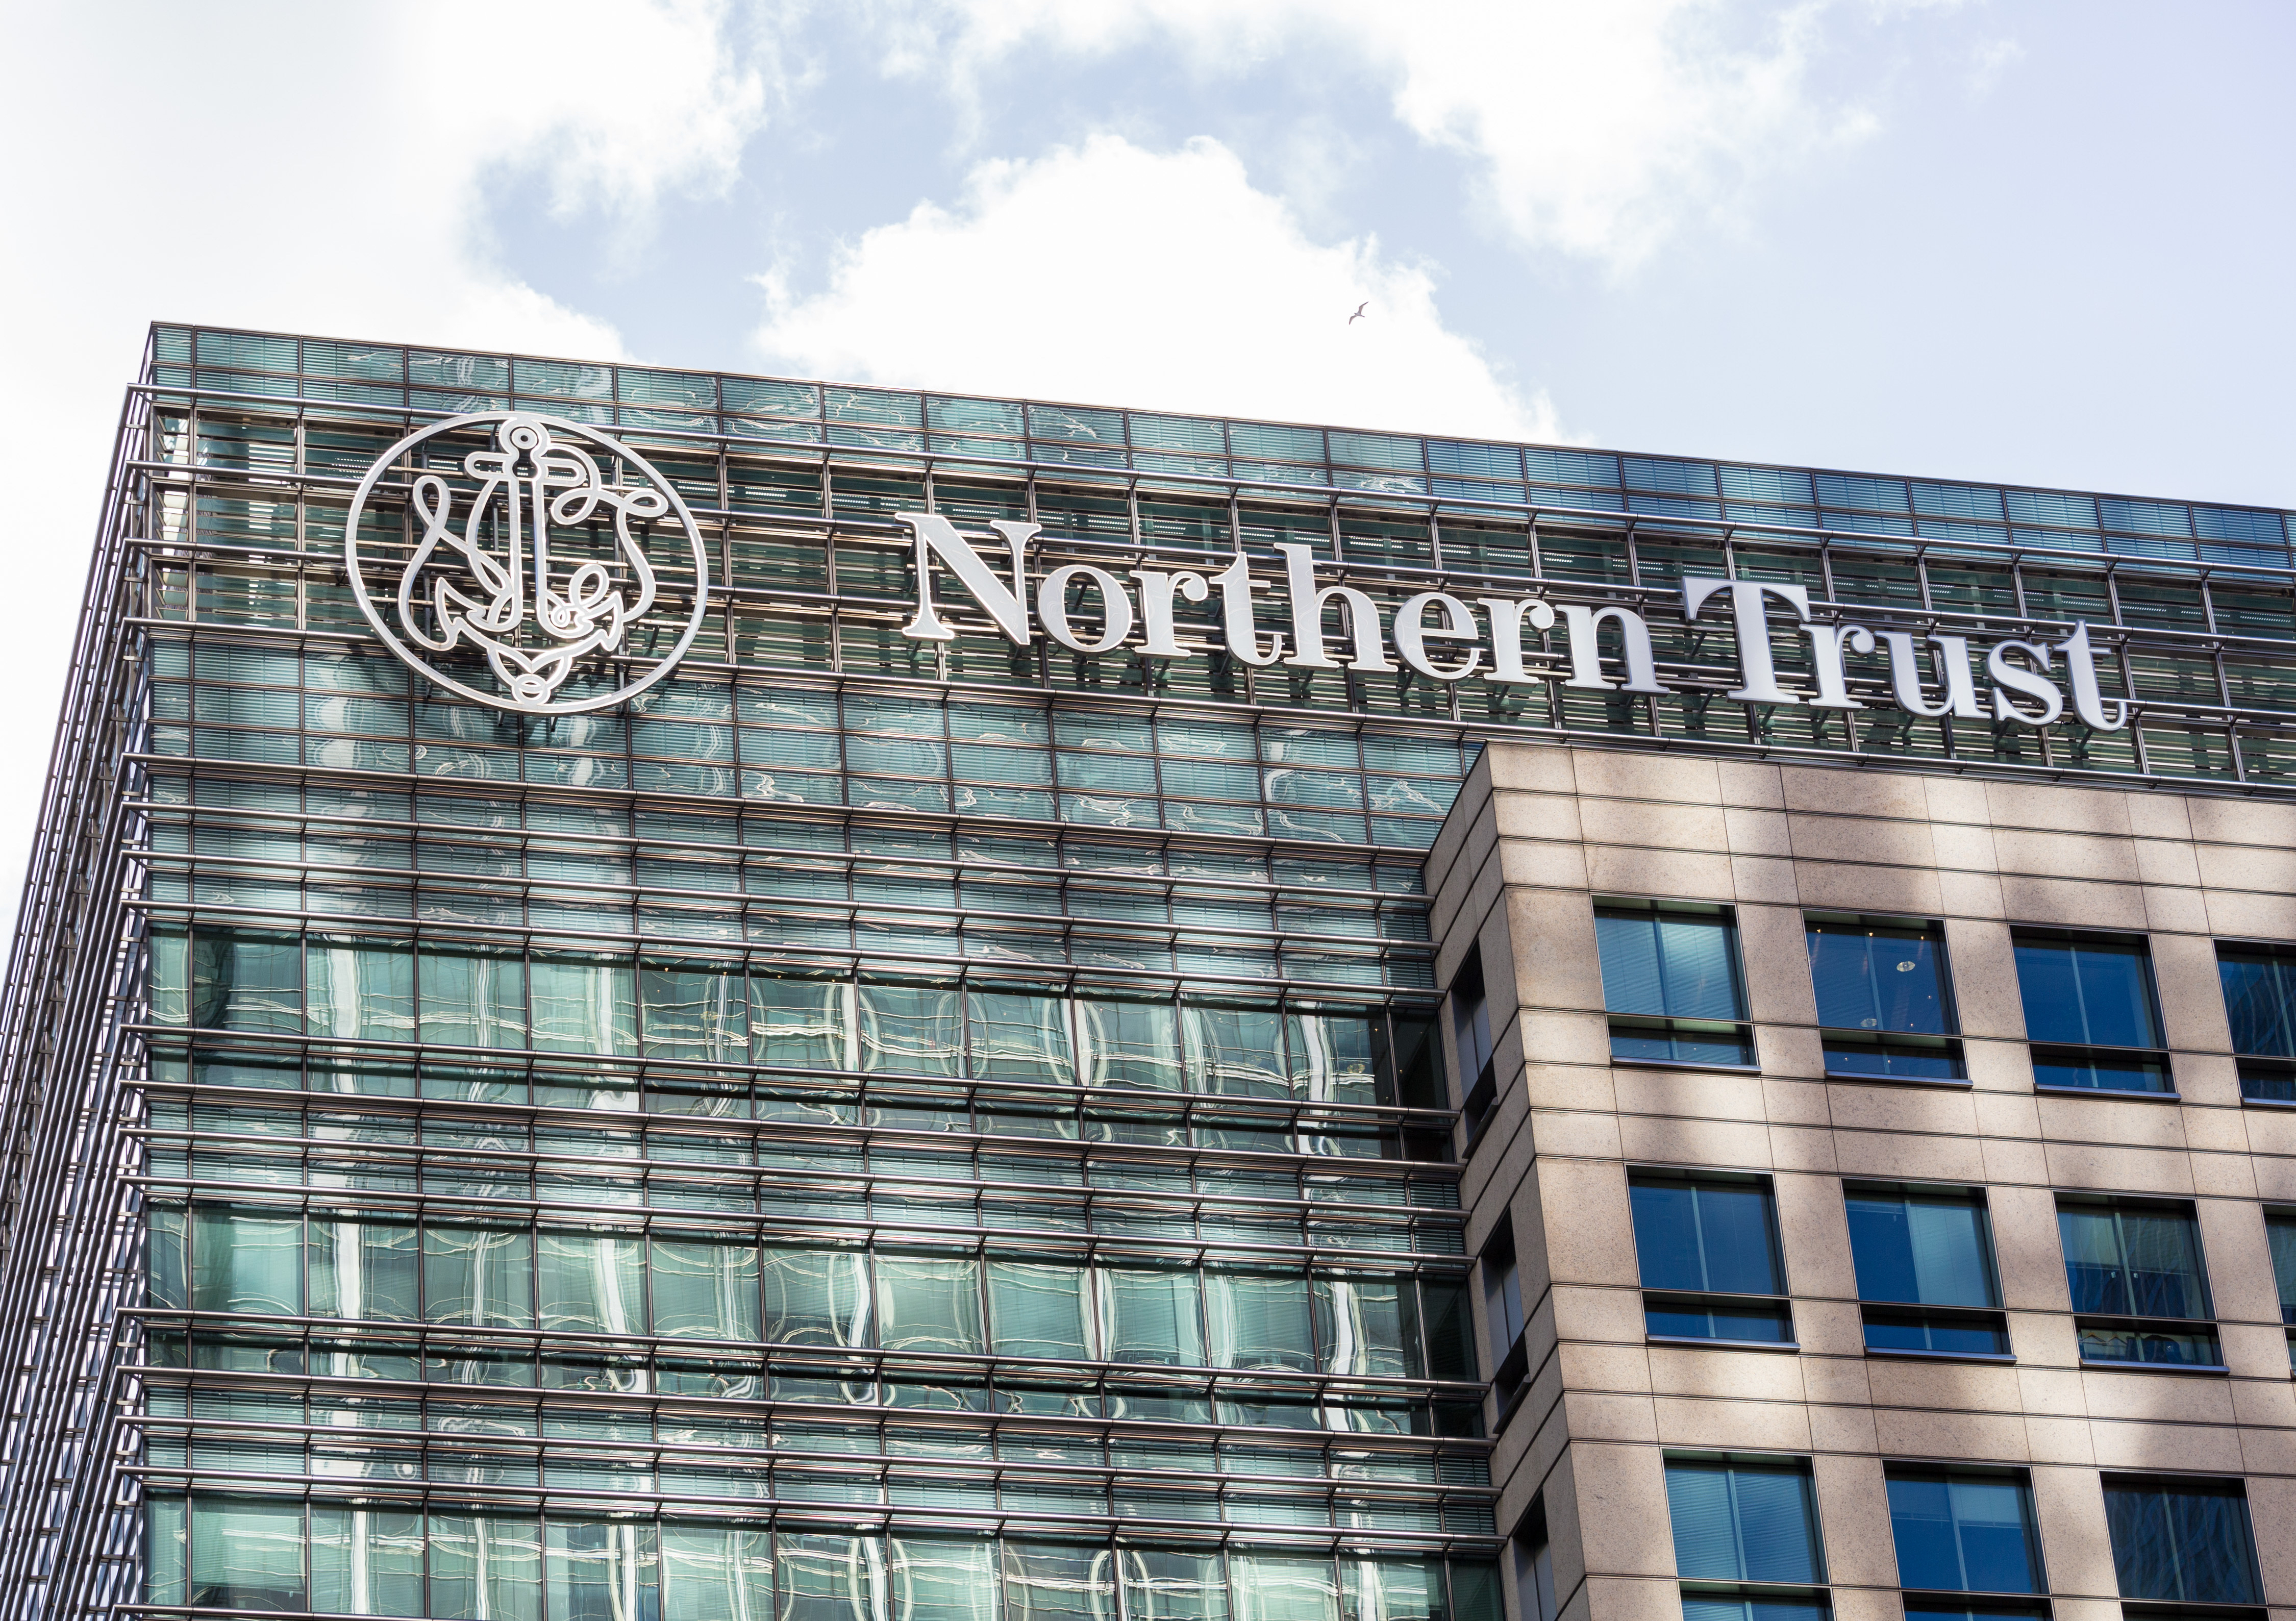 The facade of a Northern Trust office with the company's name and logo